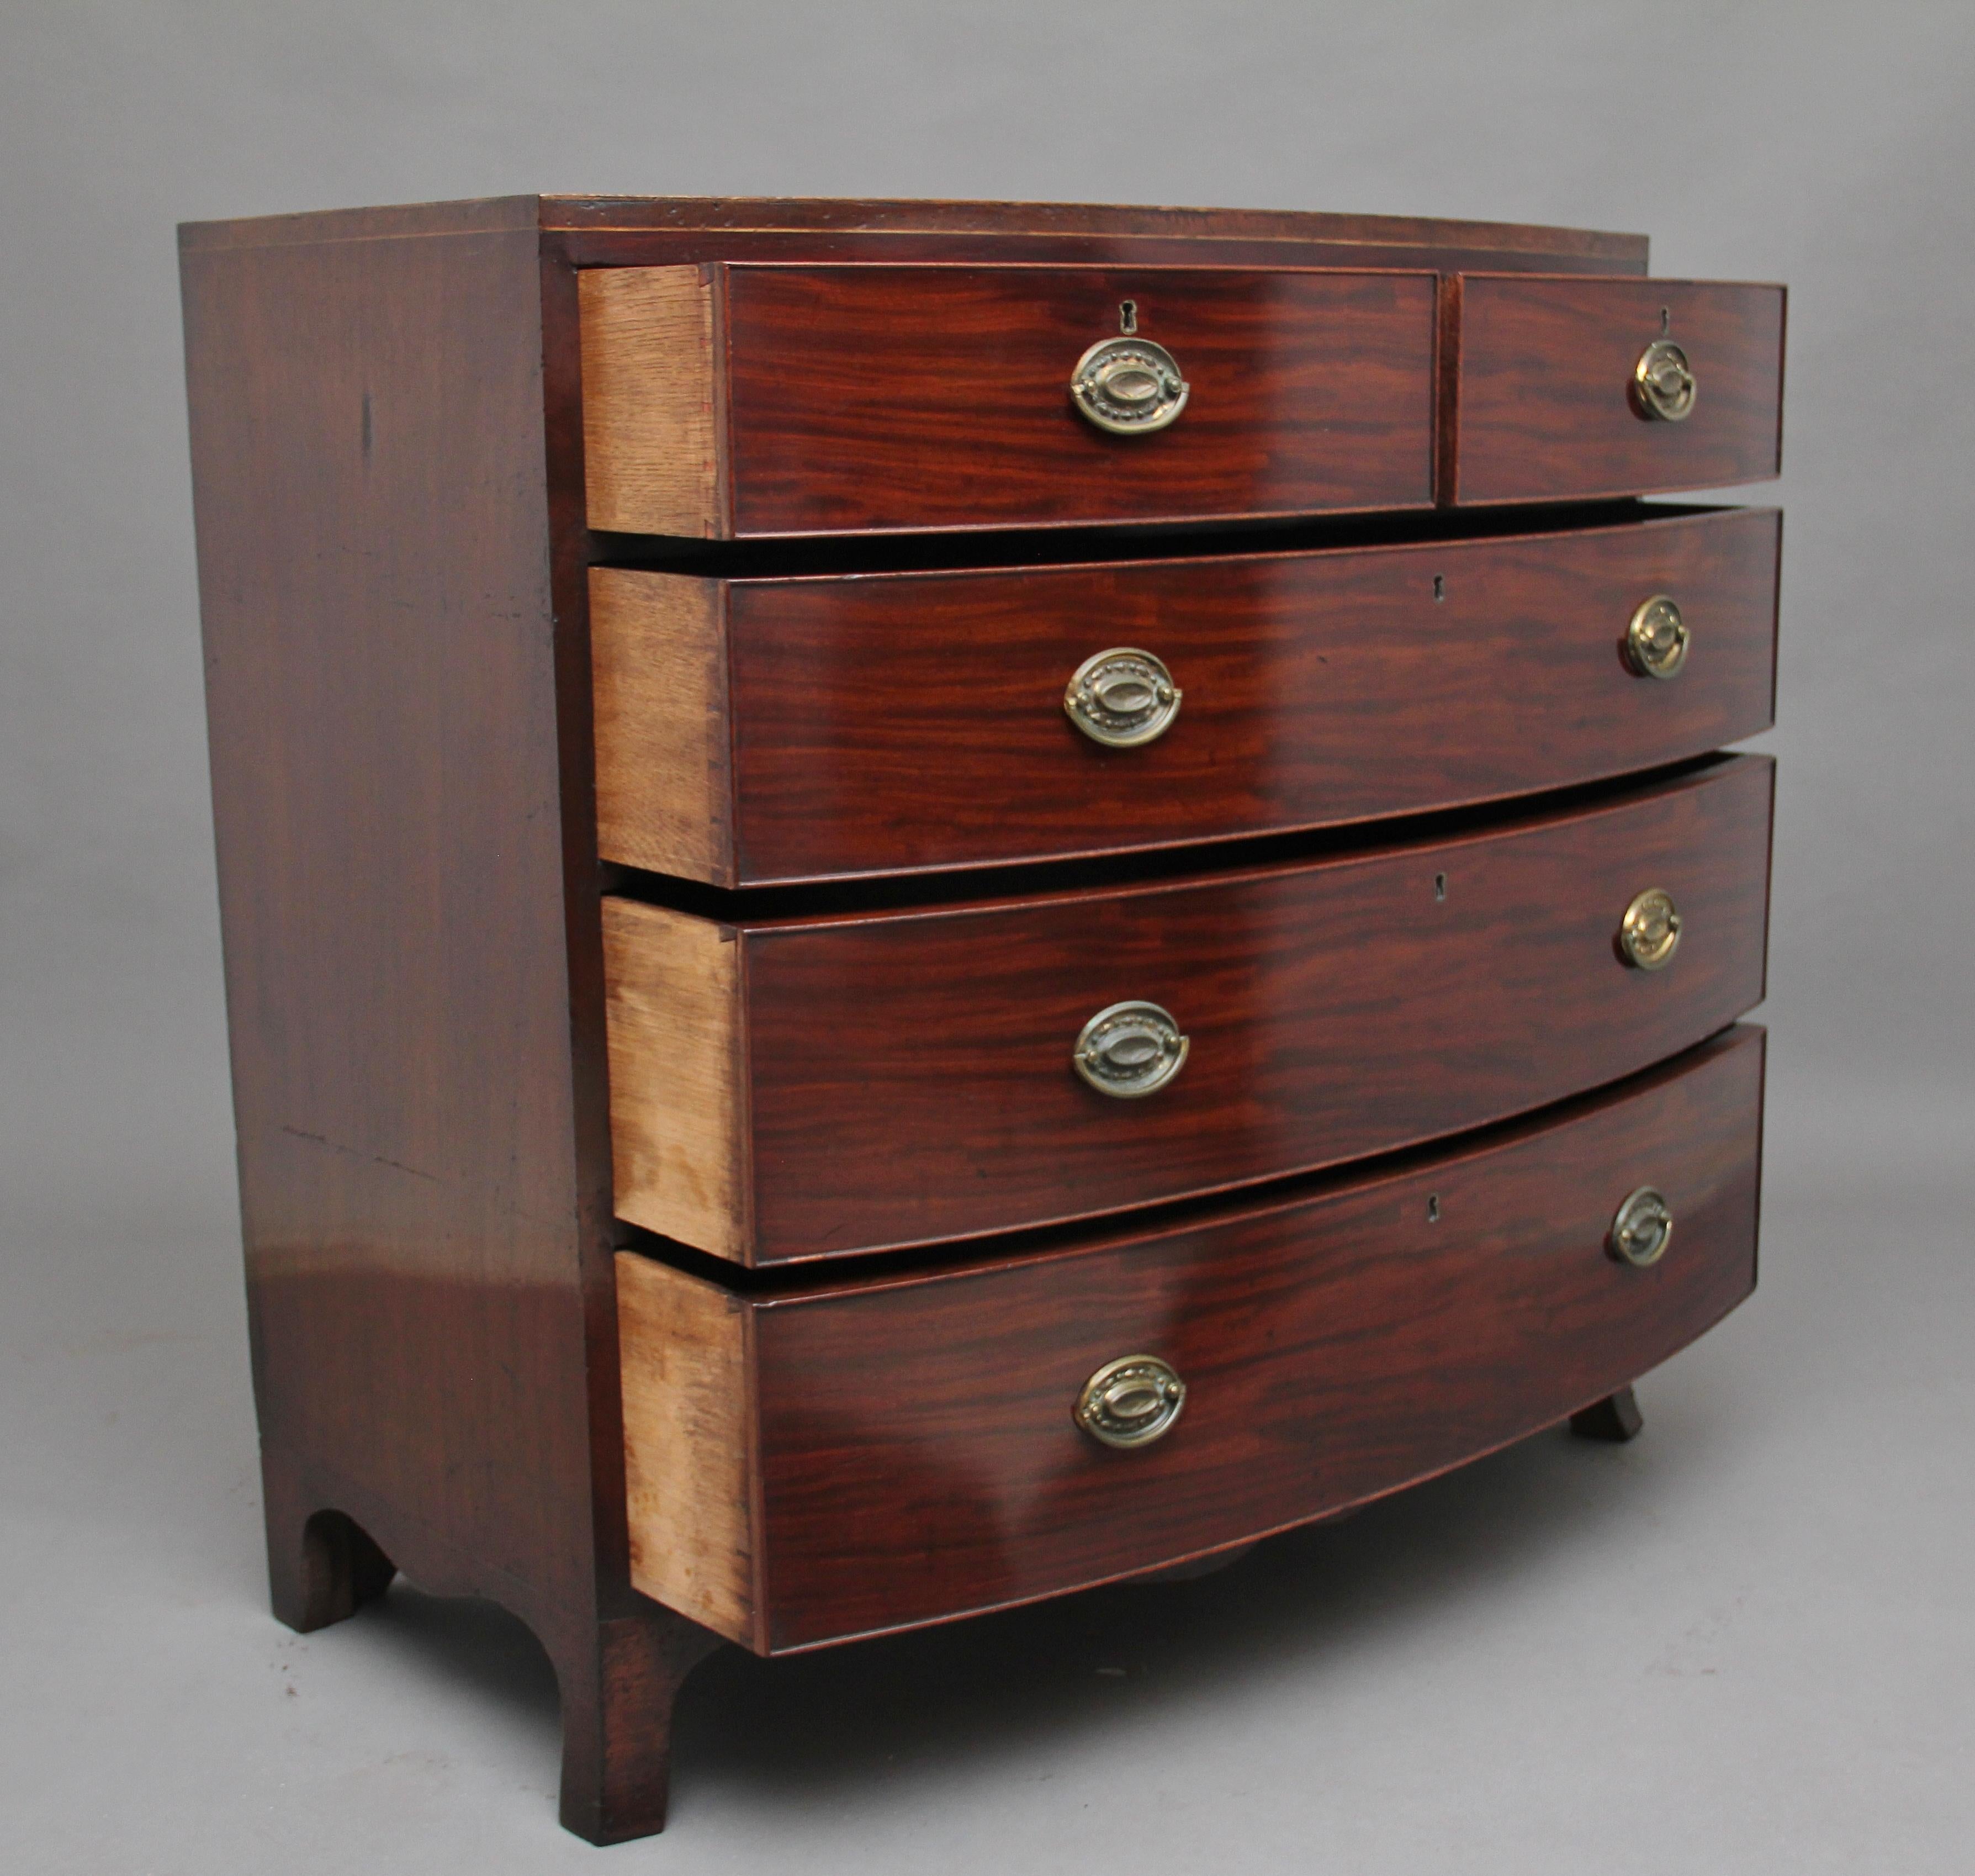 British Early 19th Century Mahogany Bowfront Chest of Drawers